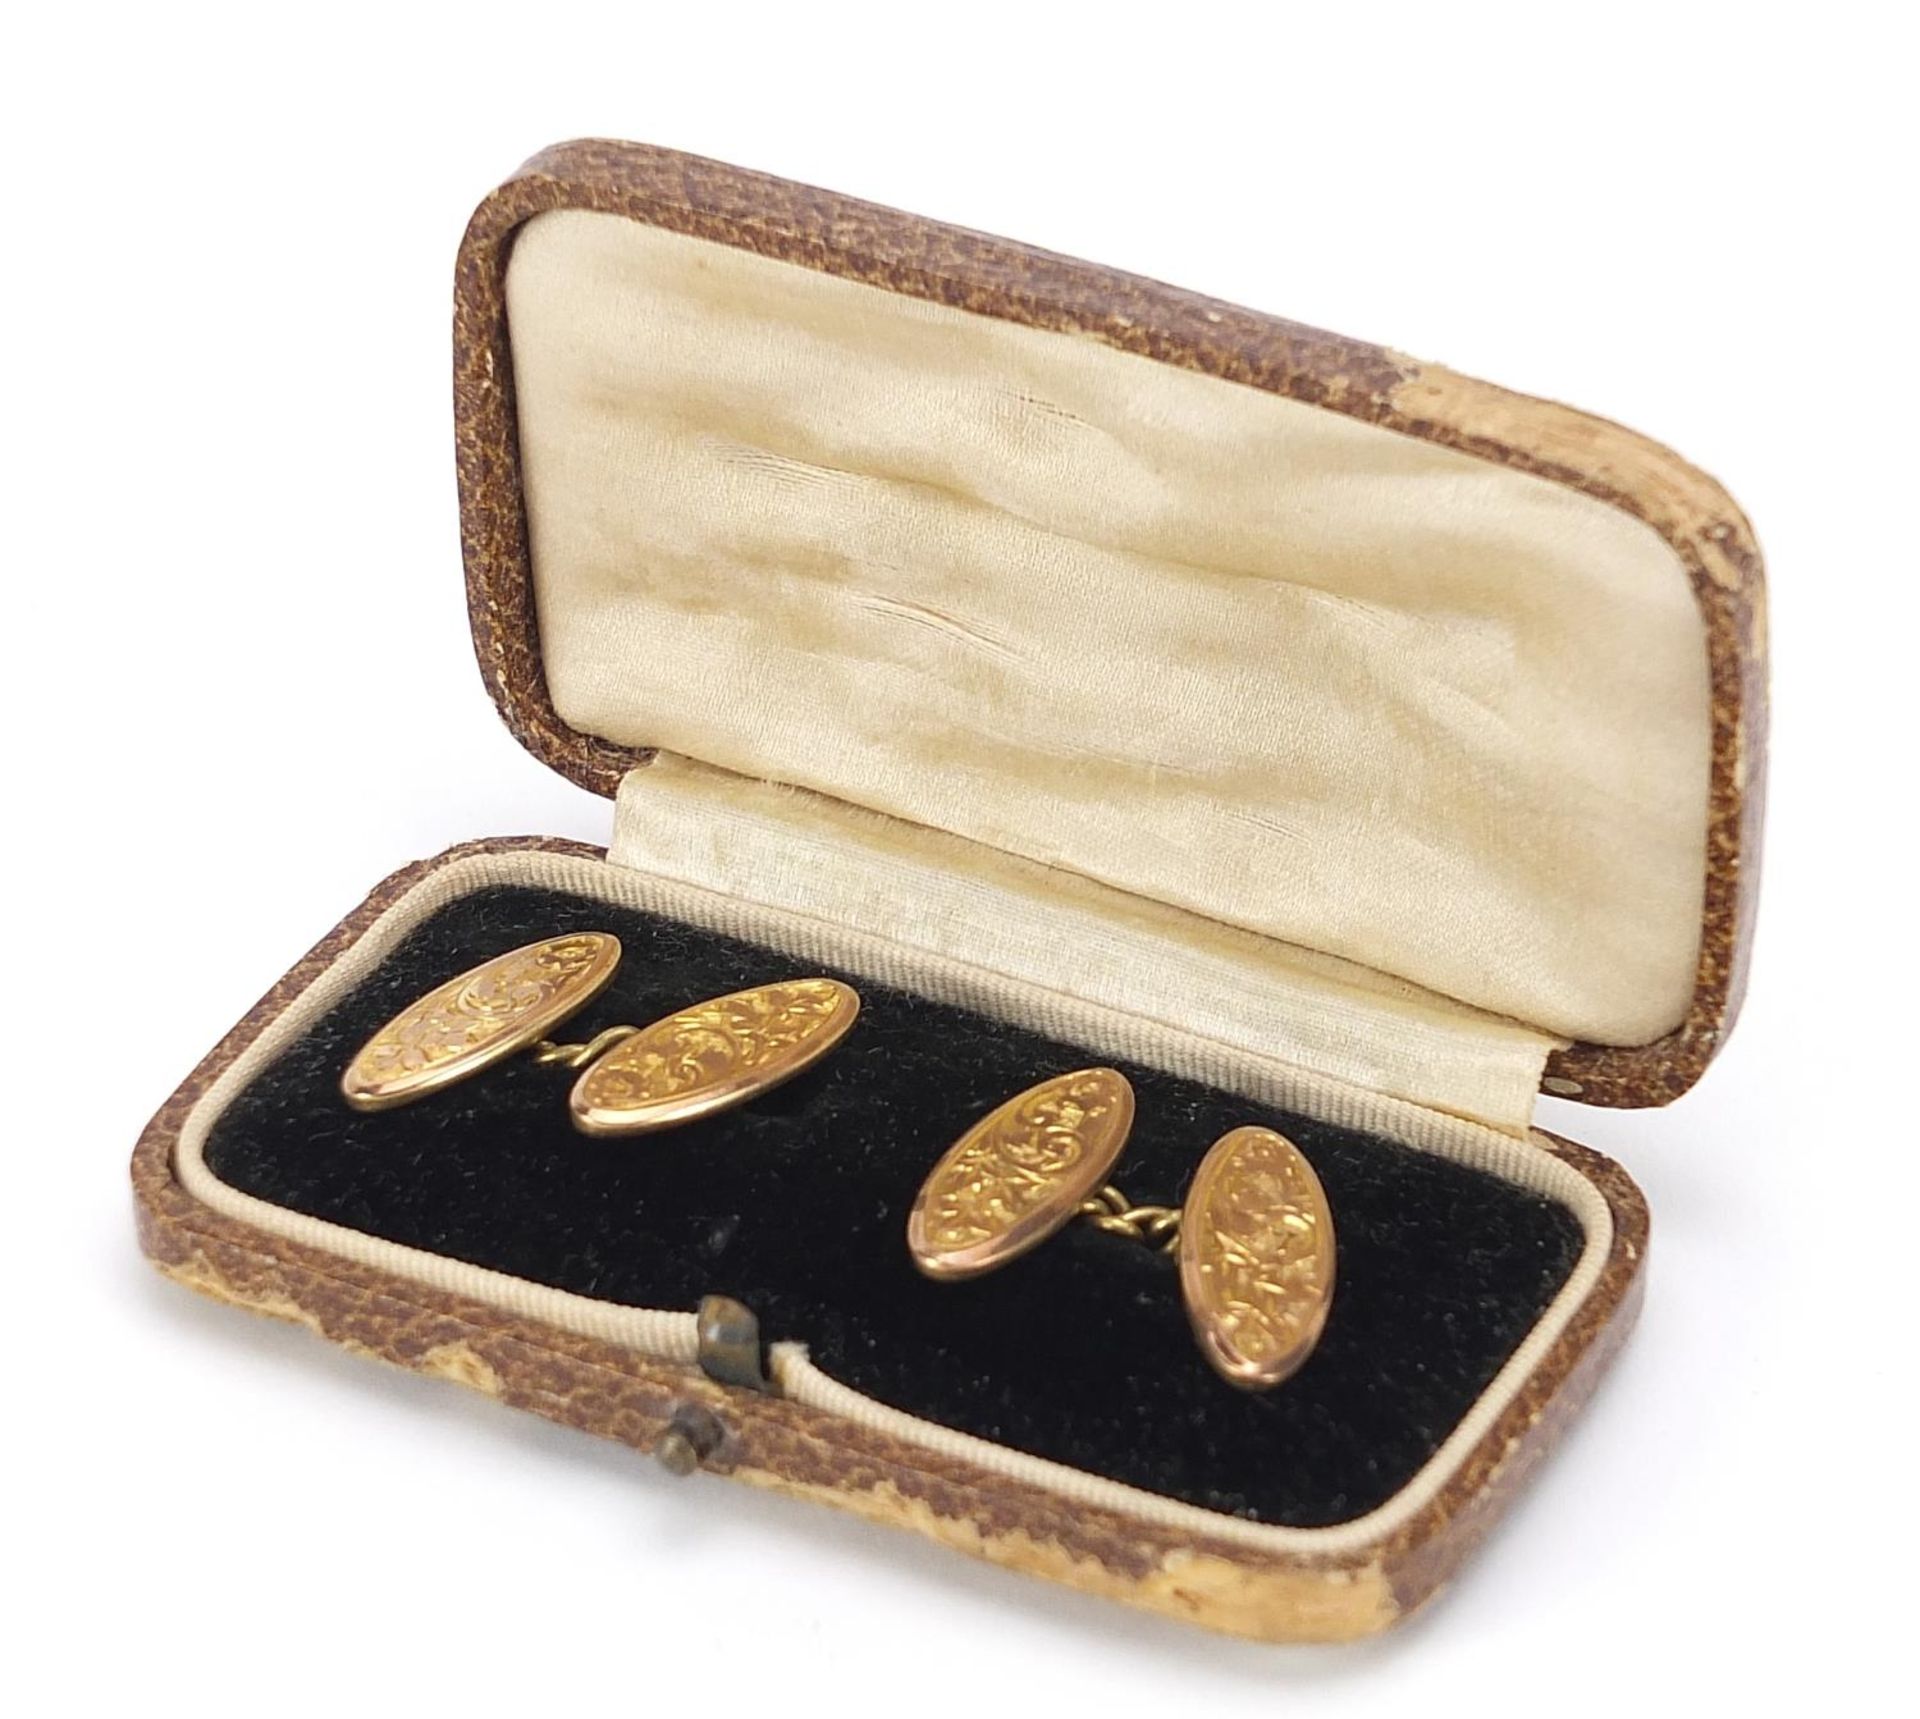 Pair of 9ct gold cufflinks with engraved decoration housed in a velvet and silk lined fitted box, - Image 3 of 5